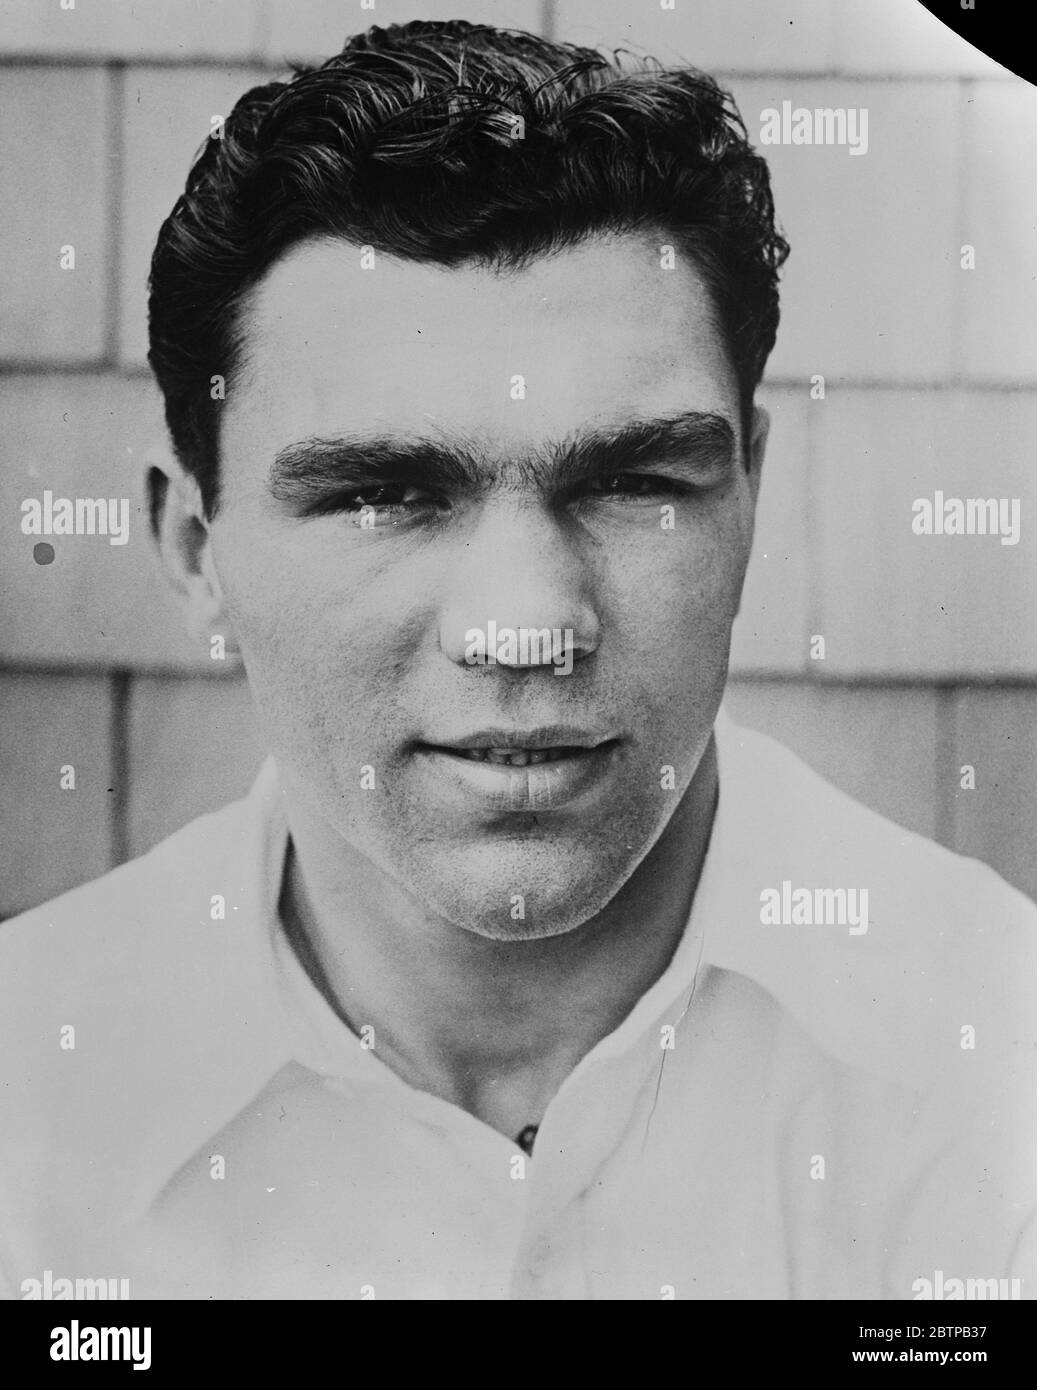 German boxer Black and White Stock Photos & Images - Alamy